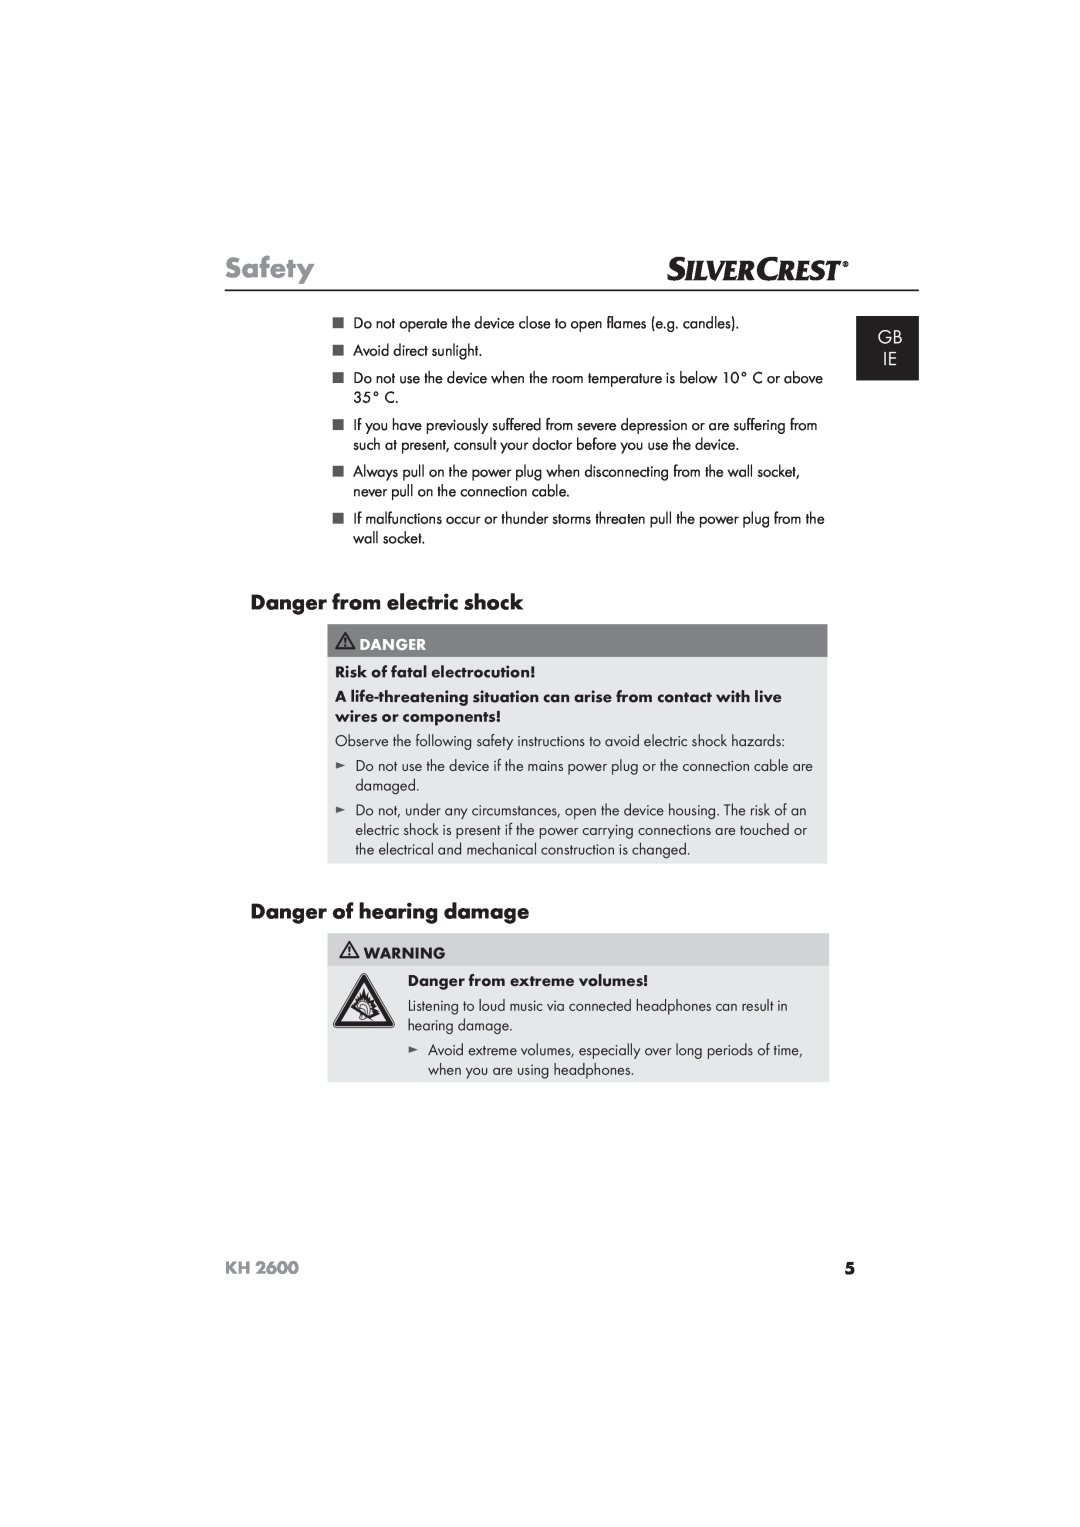 Silvercrest KH 2600 manual Danger from electric shock, Danger of hearing damage, Safety, Gb Ie 